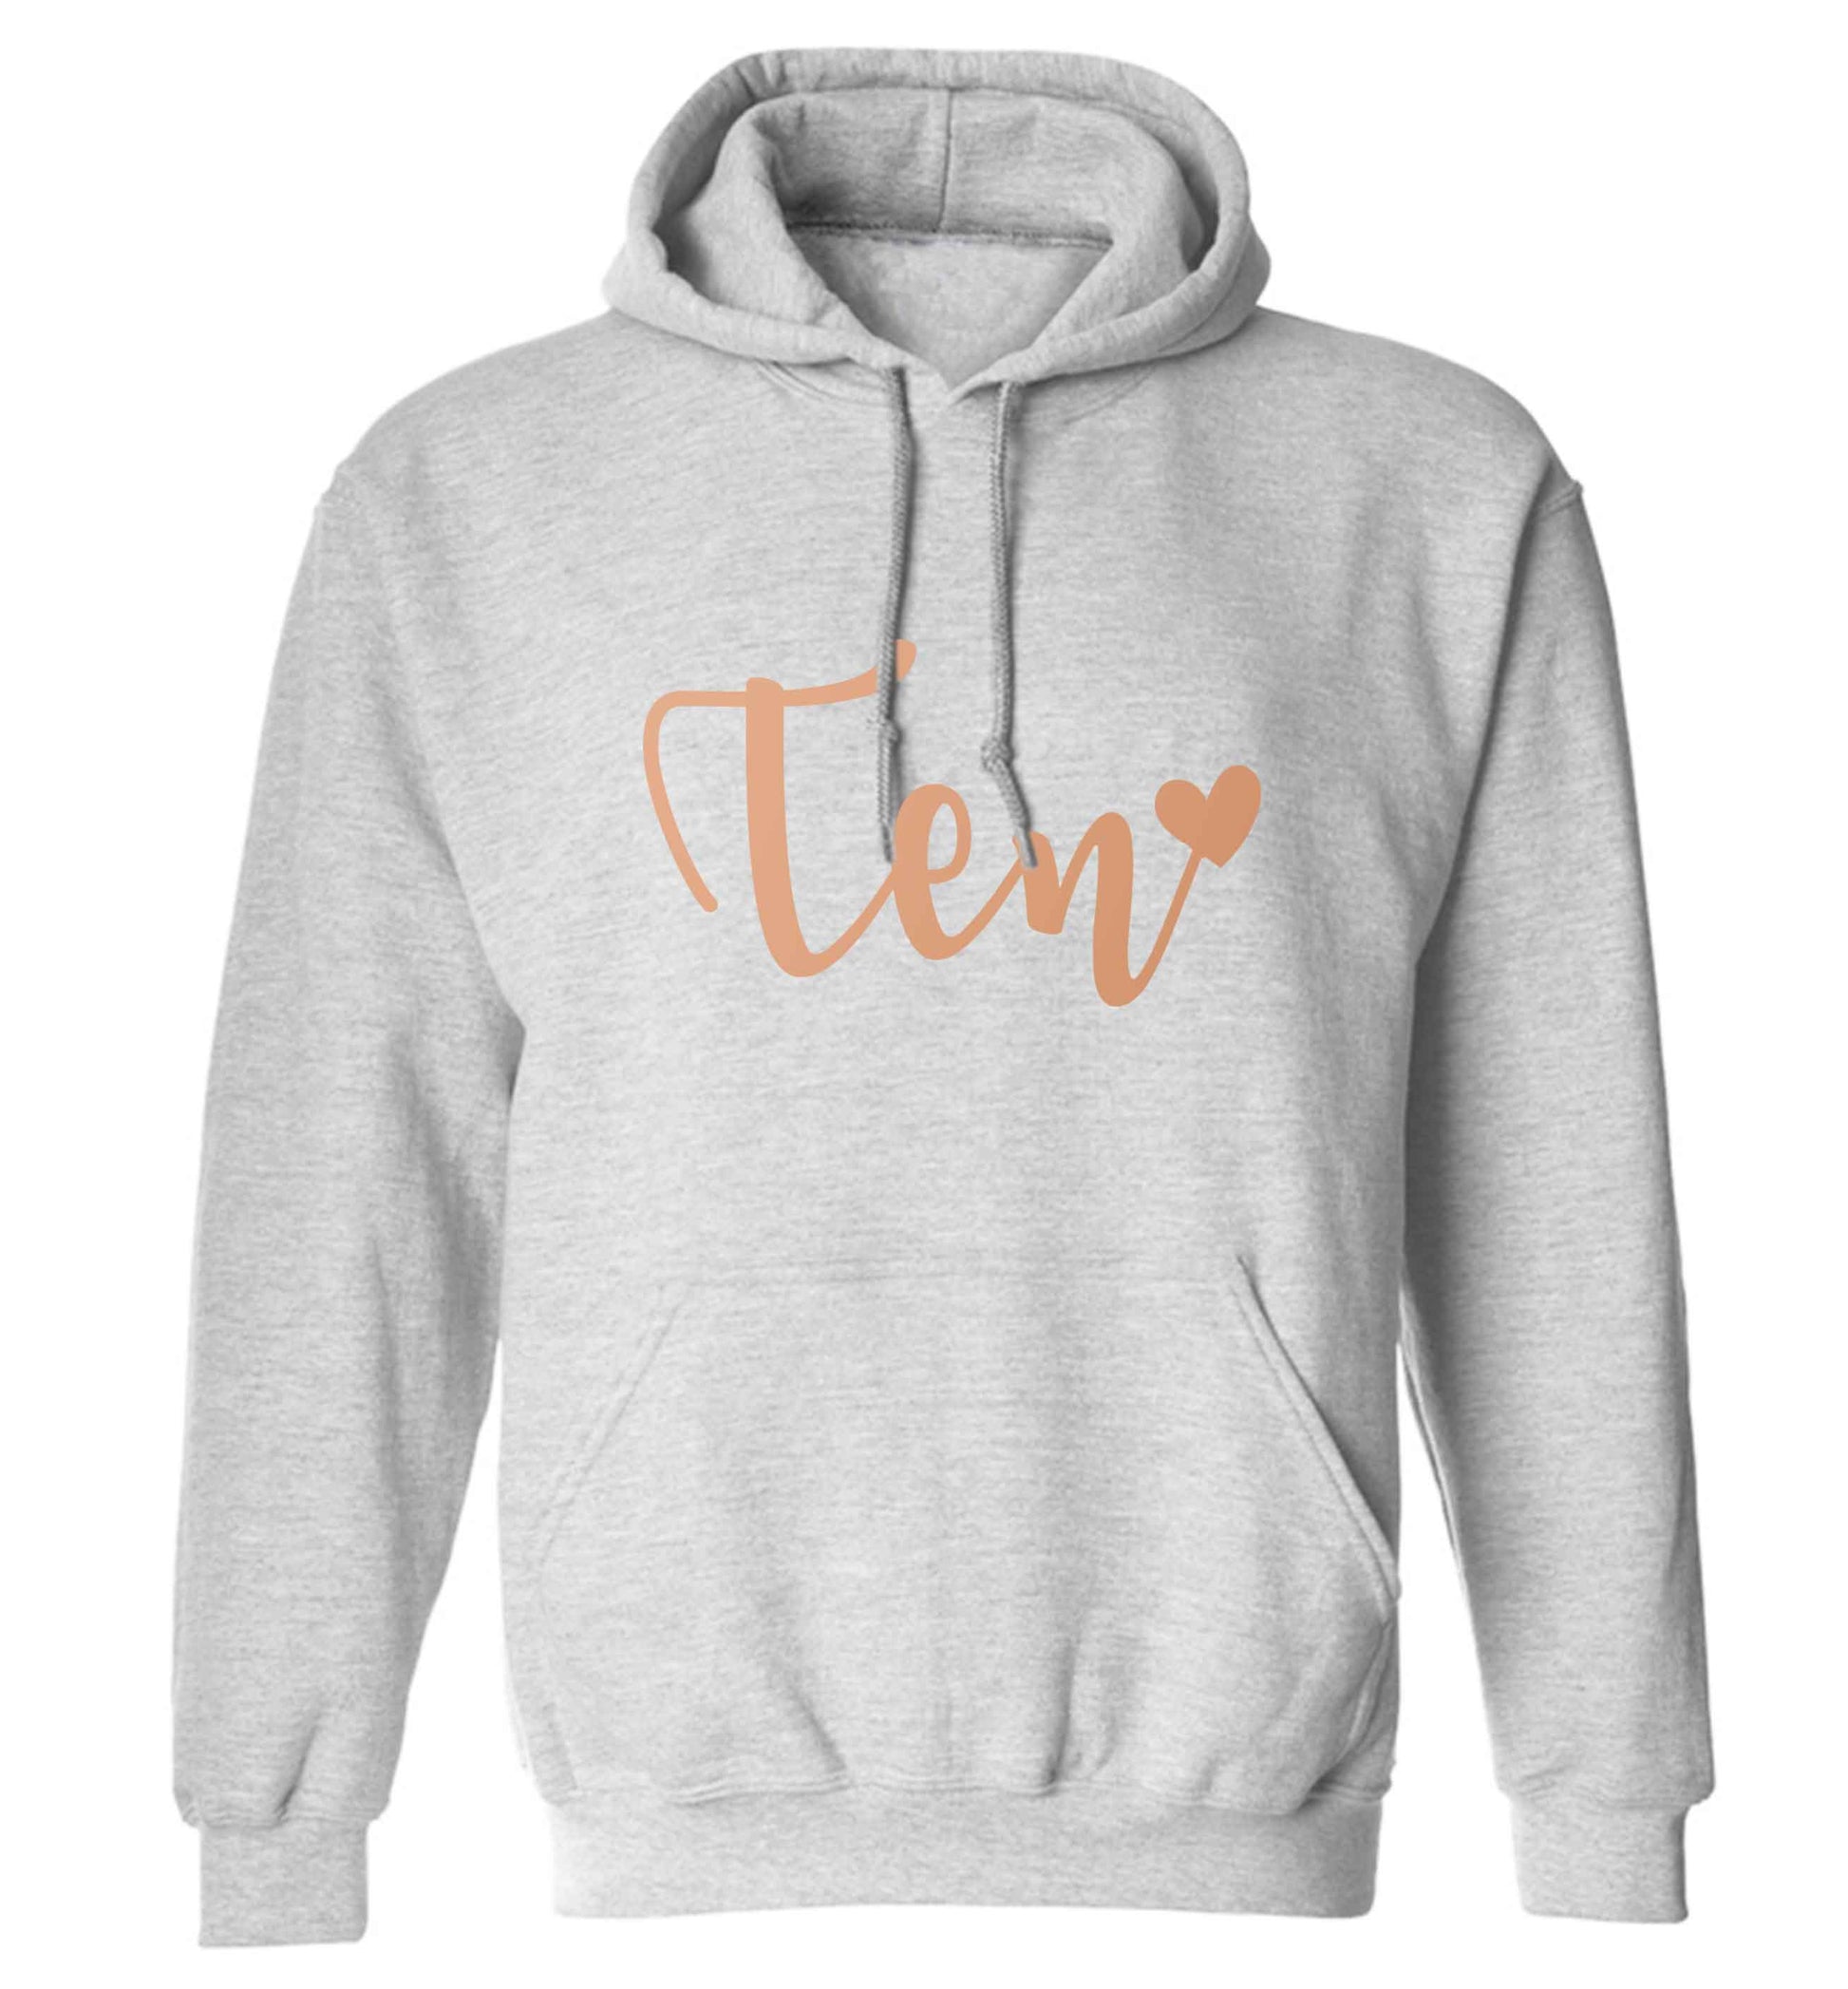 Rose gold eleven adults unisex grey hoodie 2XL